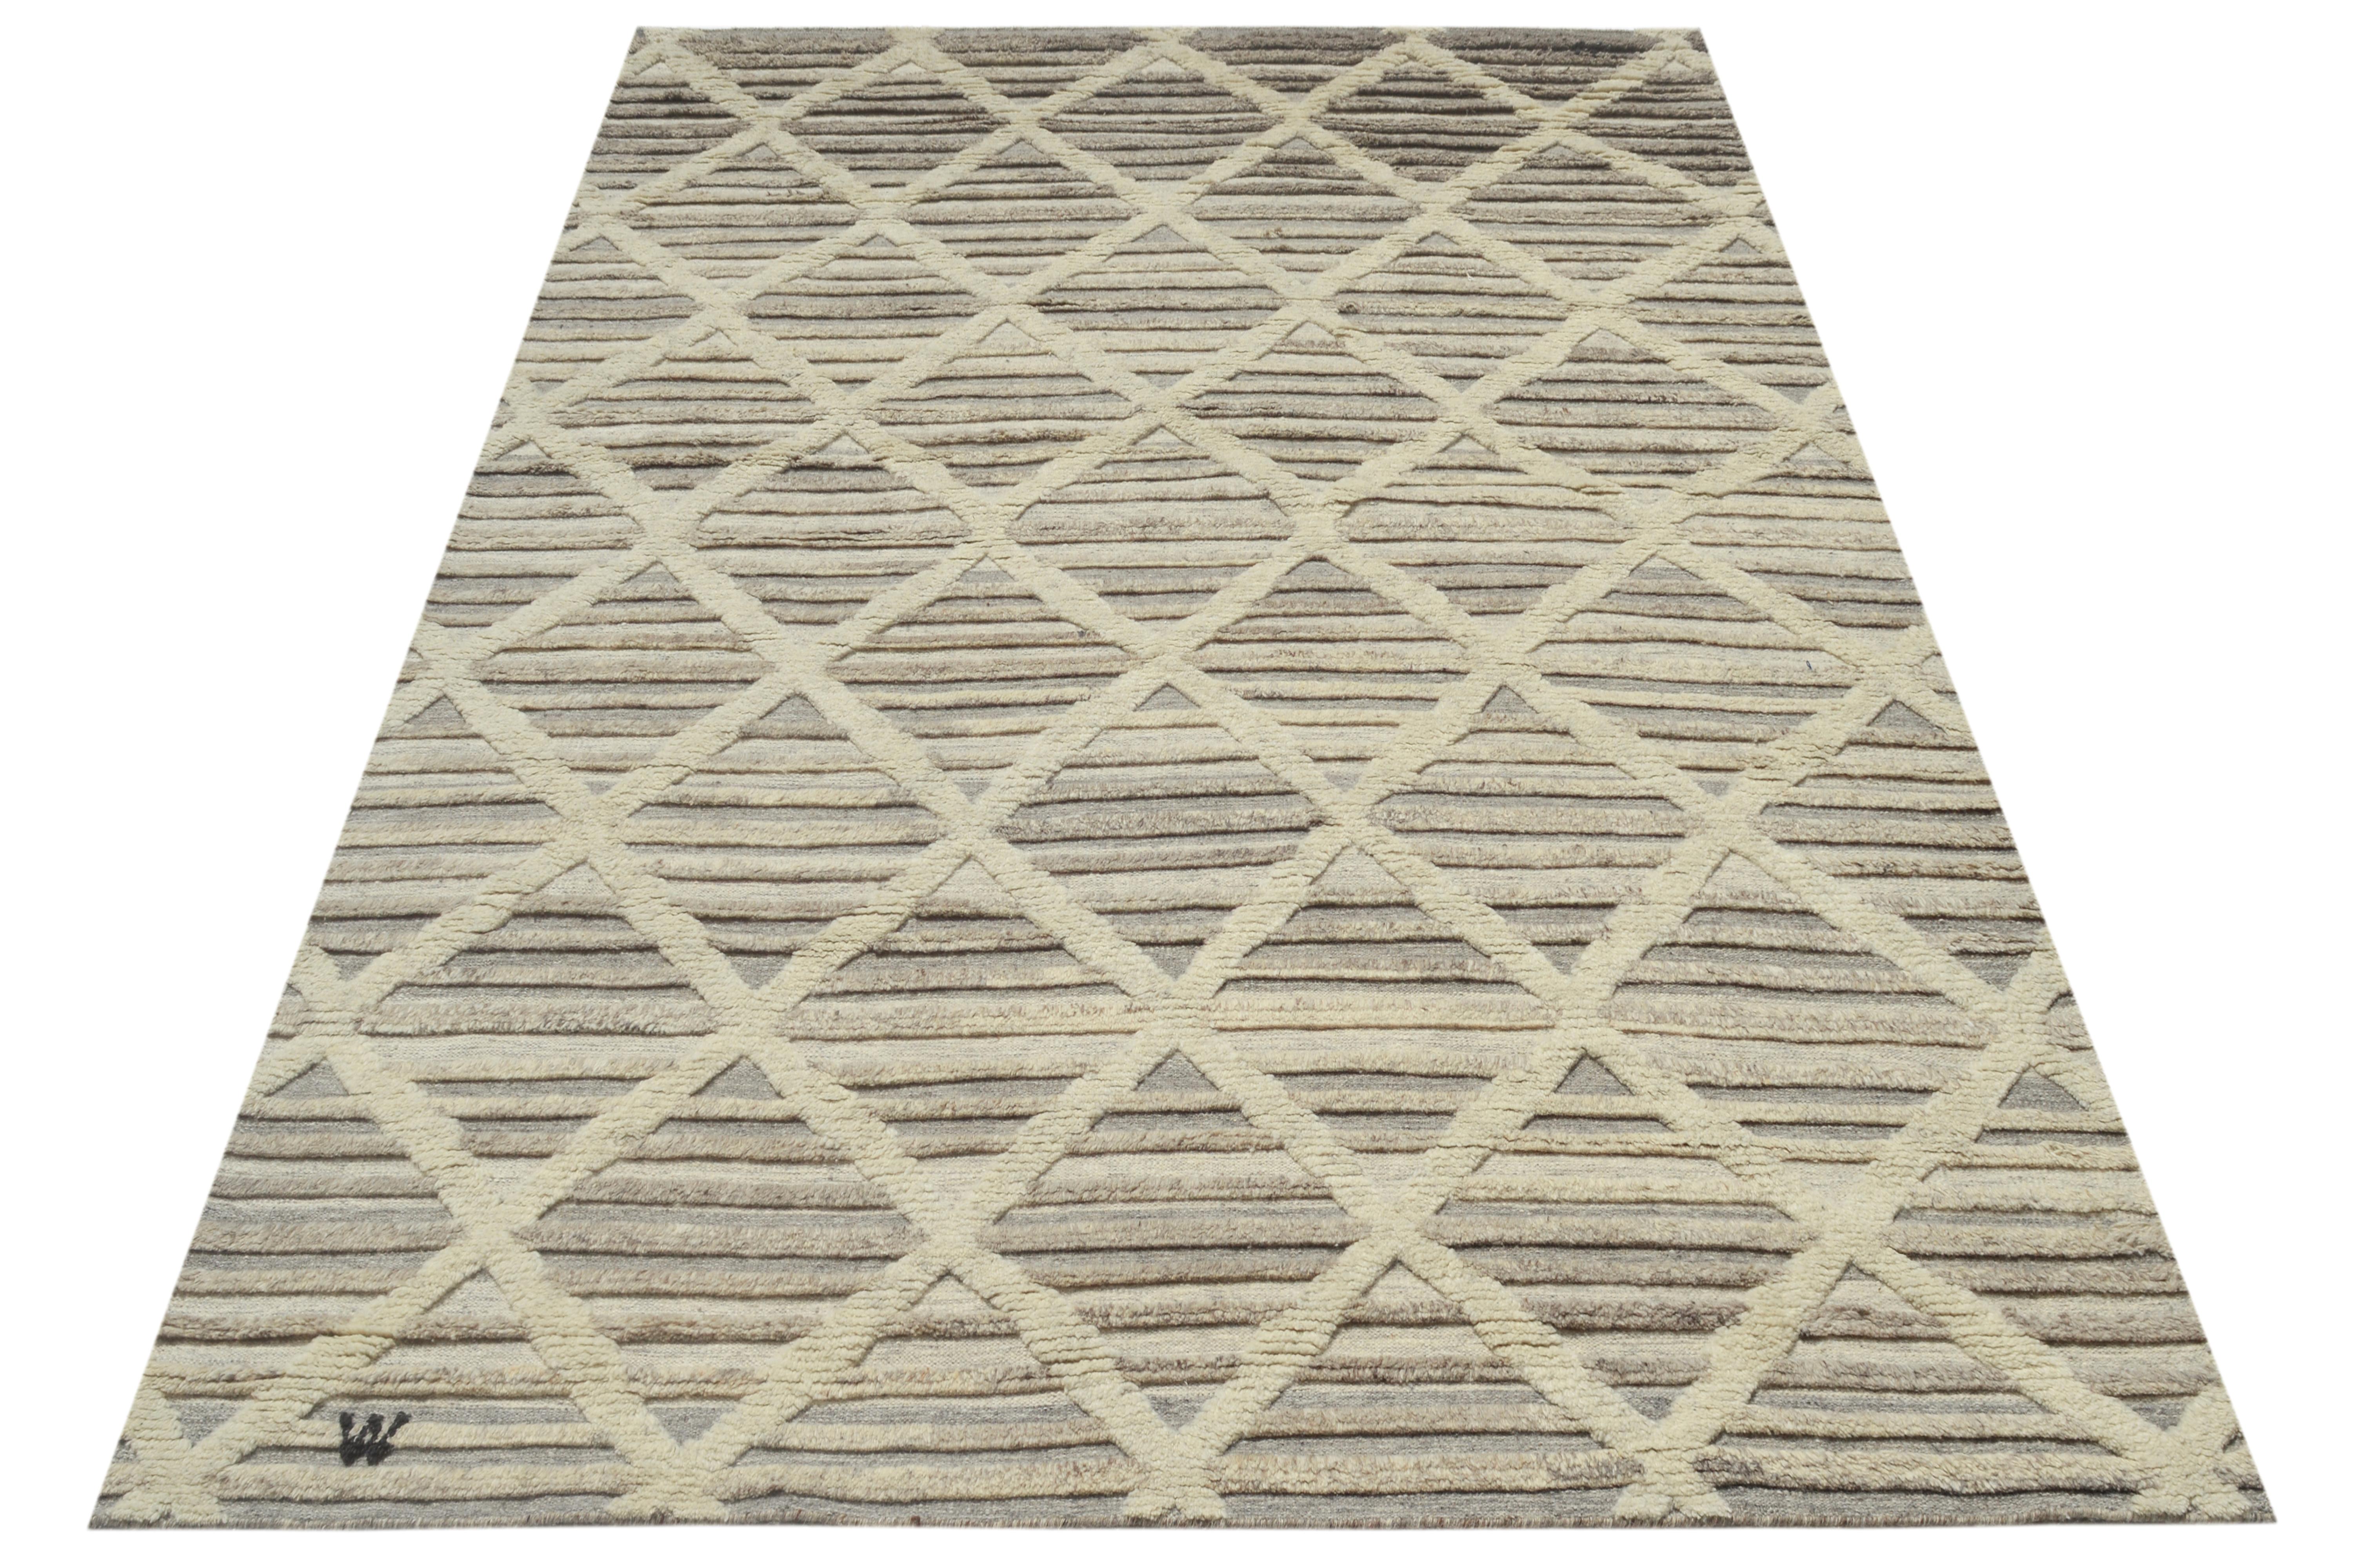 Hand-knotted wool pile on a cotton foundation.

High-low pile design.

Approximate Dimensions: 9' x 12'

Origin: India

Field Color: Ivory. 

Accent Color: Grey.